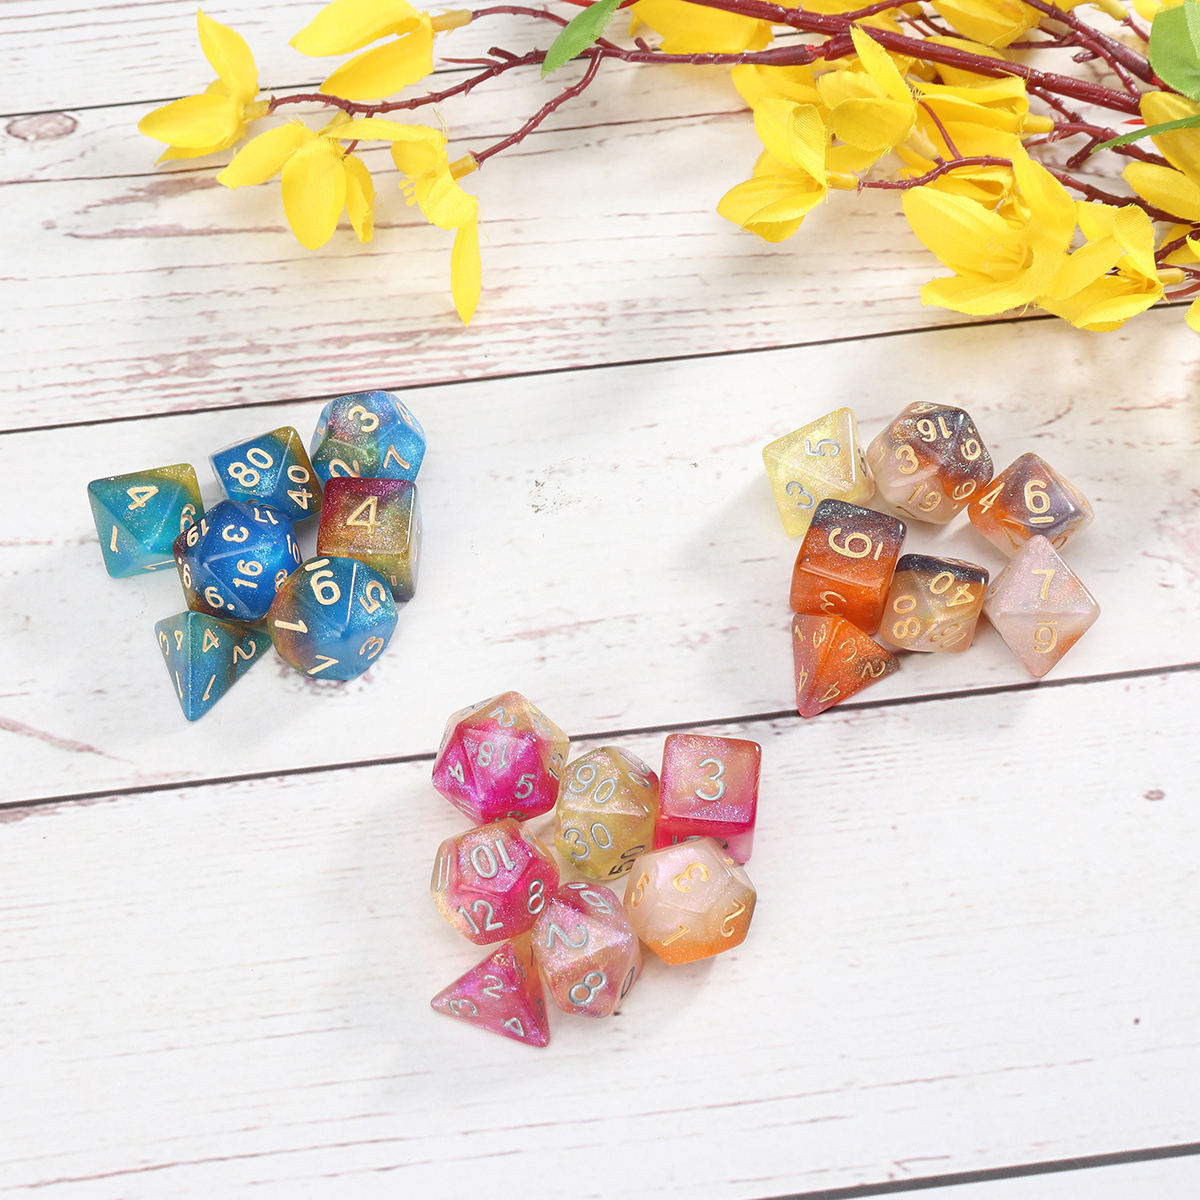 7Pcs-Polyhedral-Dice-Set-Board-Game-Multisided-Dices-Gadget-Acrylic-Polyhedral-Dices-Role-Playing-Ga-1700348-2